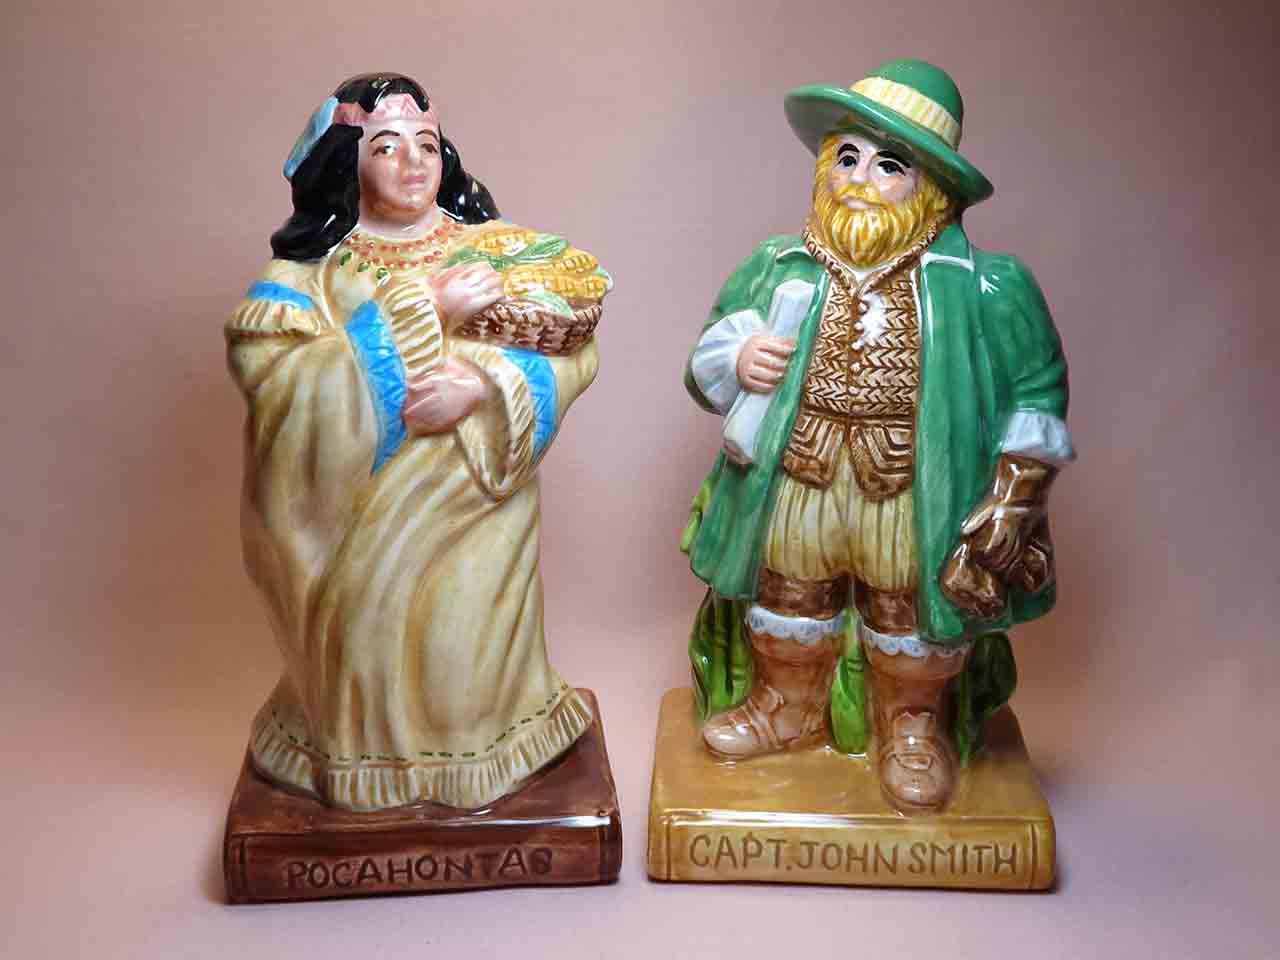 American Folklore series of salt and pepper shakers - Pocahontas & Captain John Smith